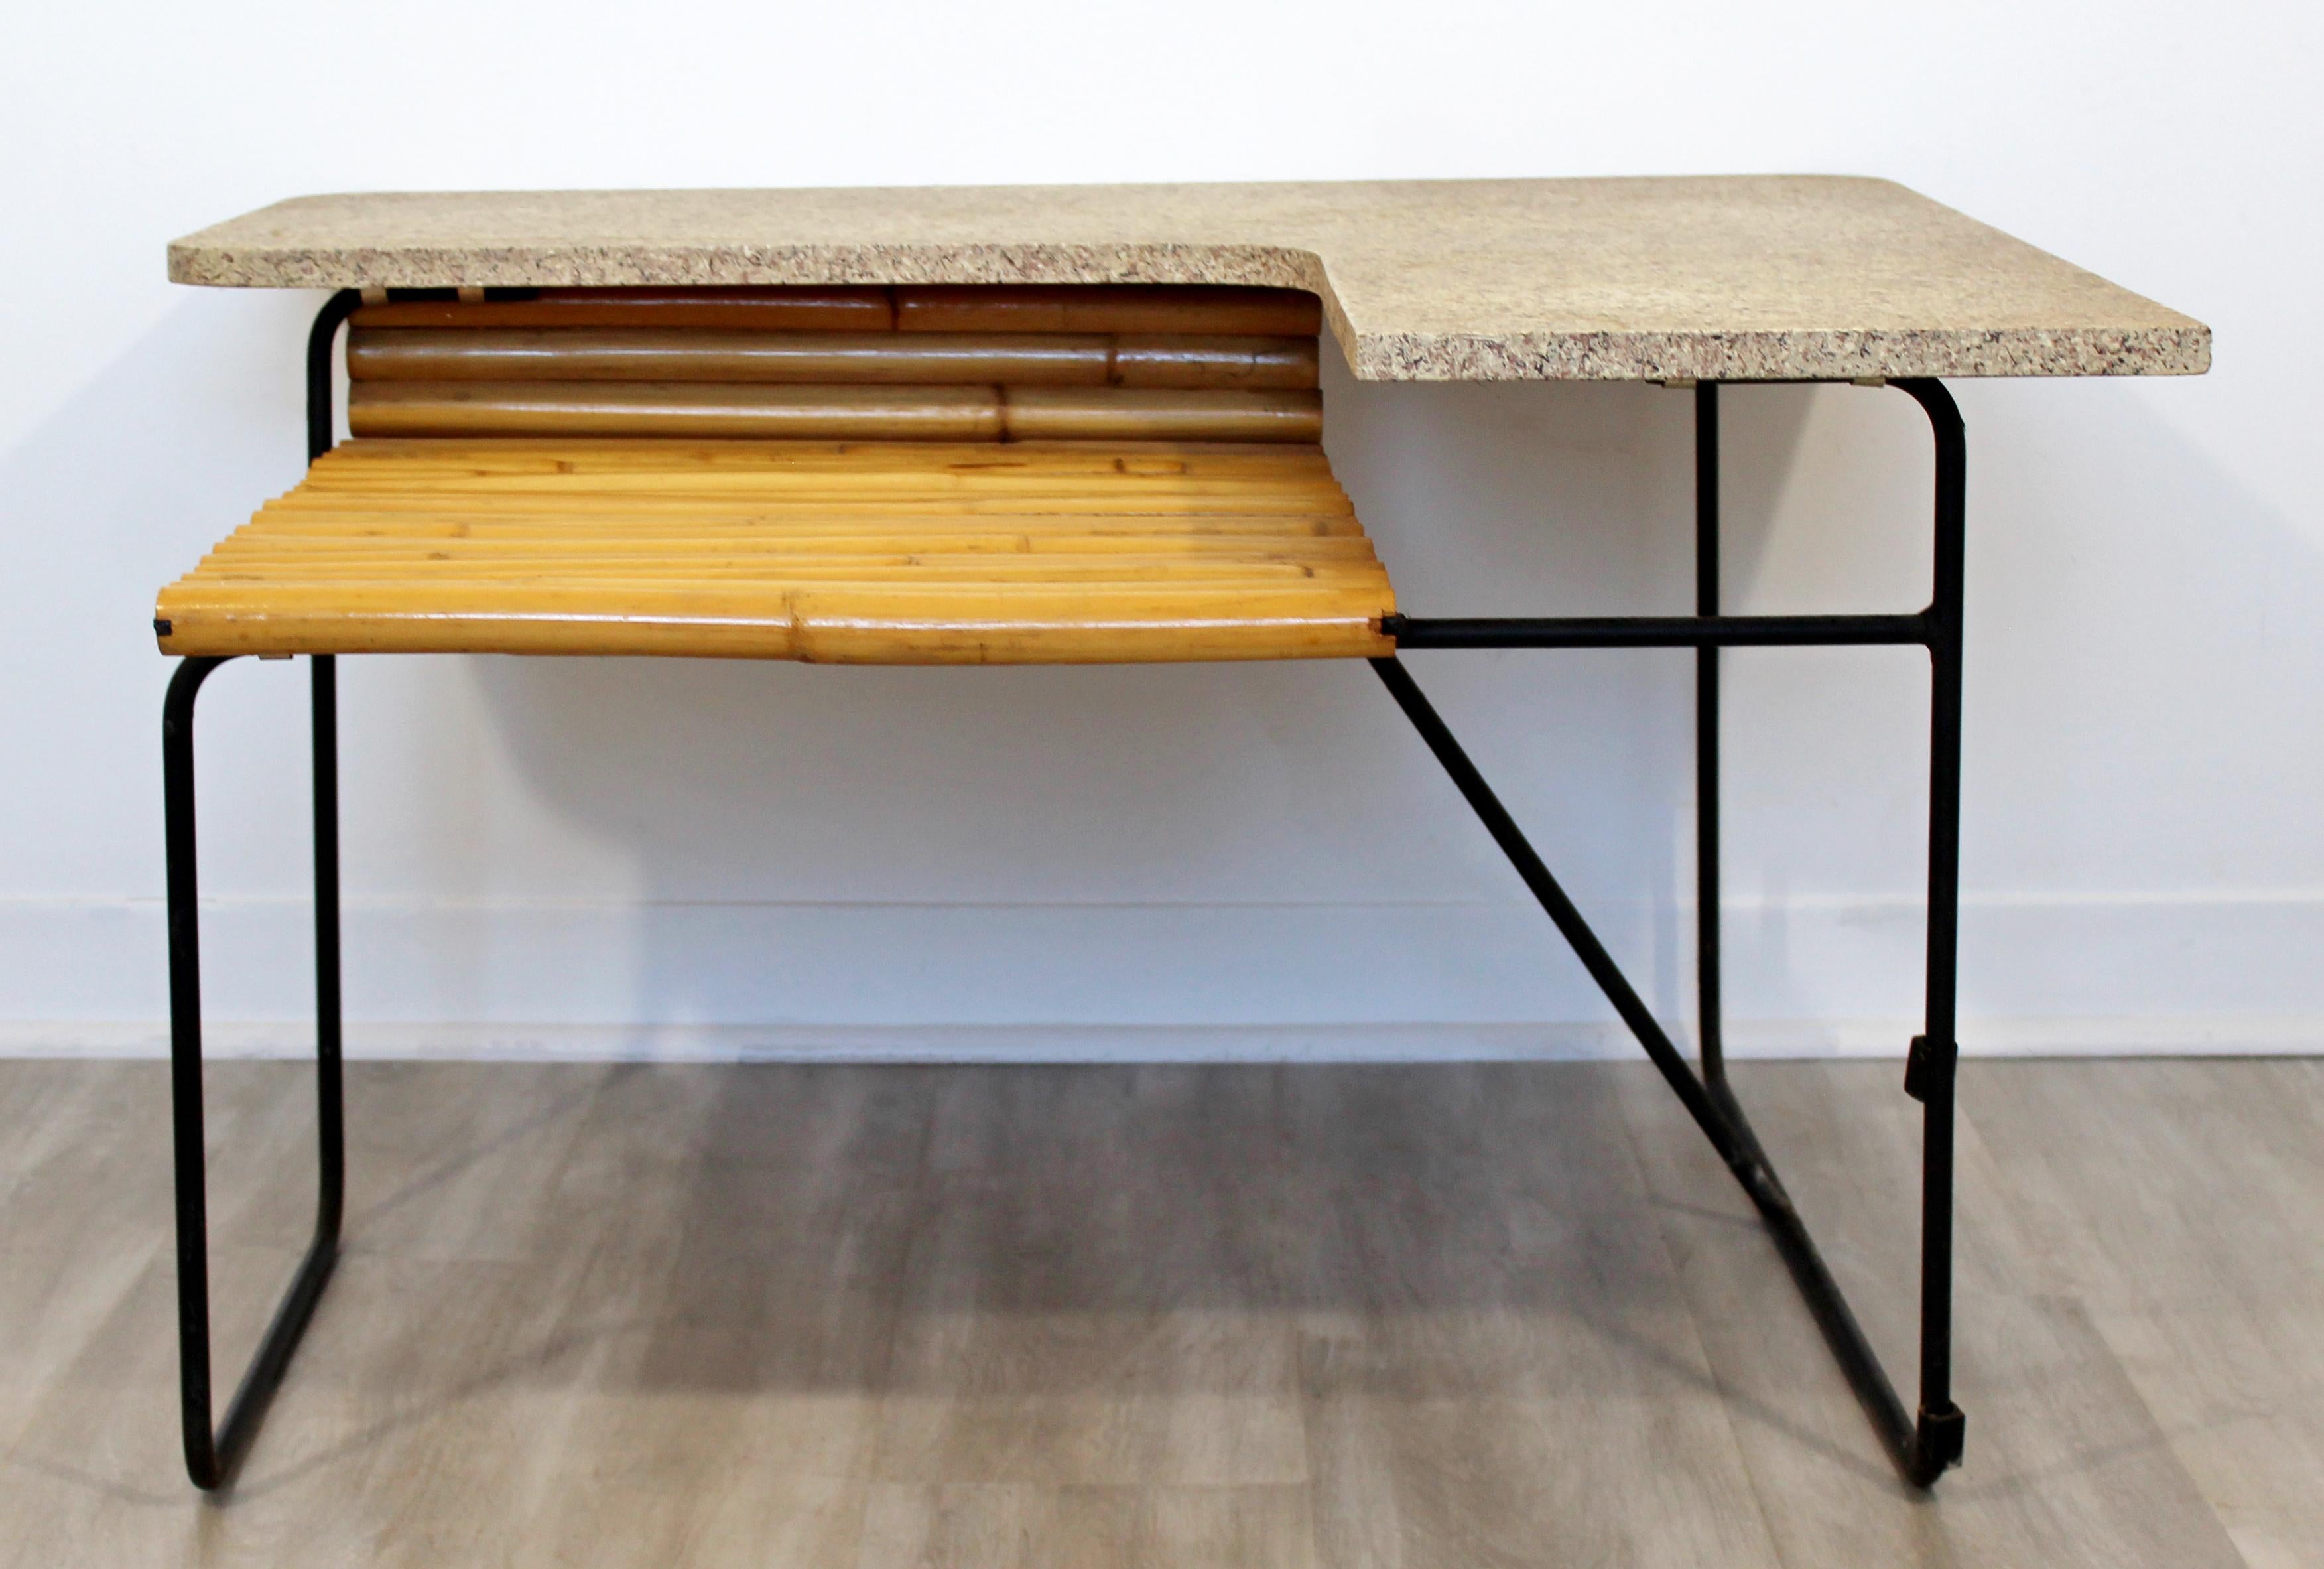 American Mid-Century Modern Shirley Ritts Square Bamboo & Wrought Iron Coffee Table 1950s